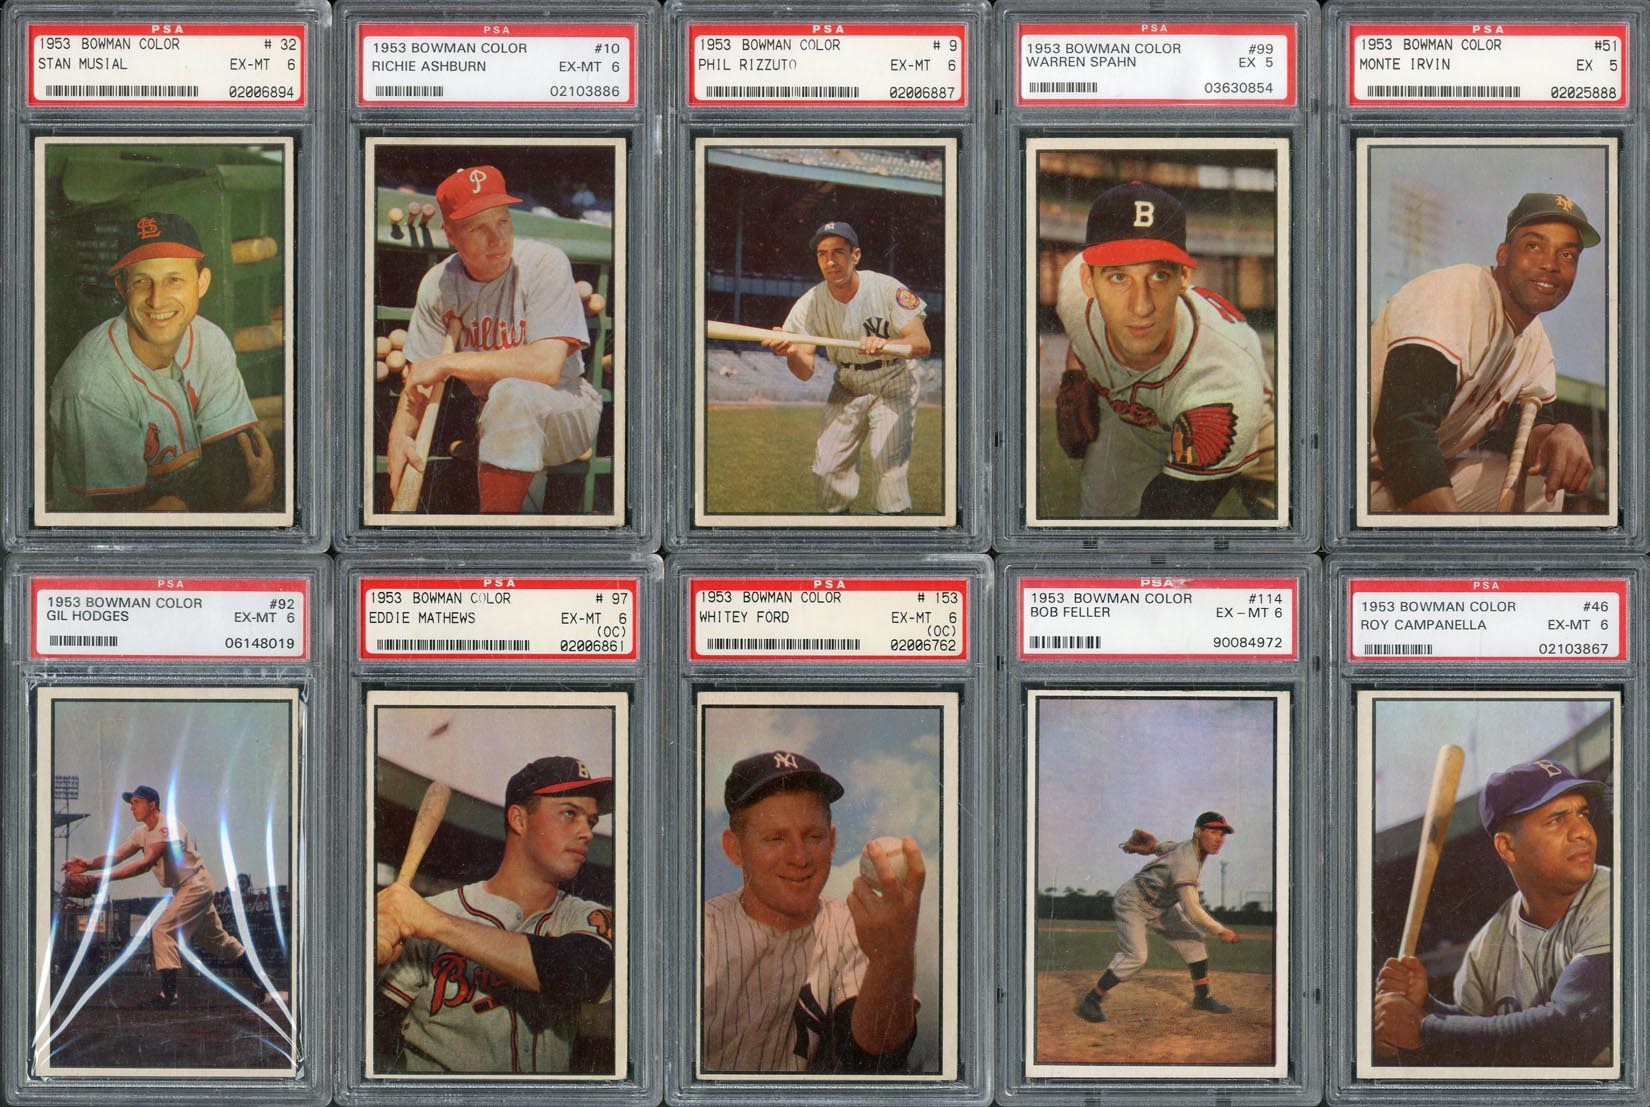 - 1953 Bowman Color PSA Graded Partial Set with Hall of Famers (94/160)